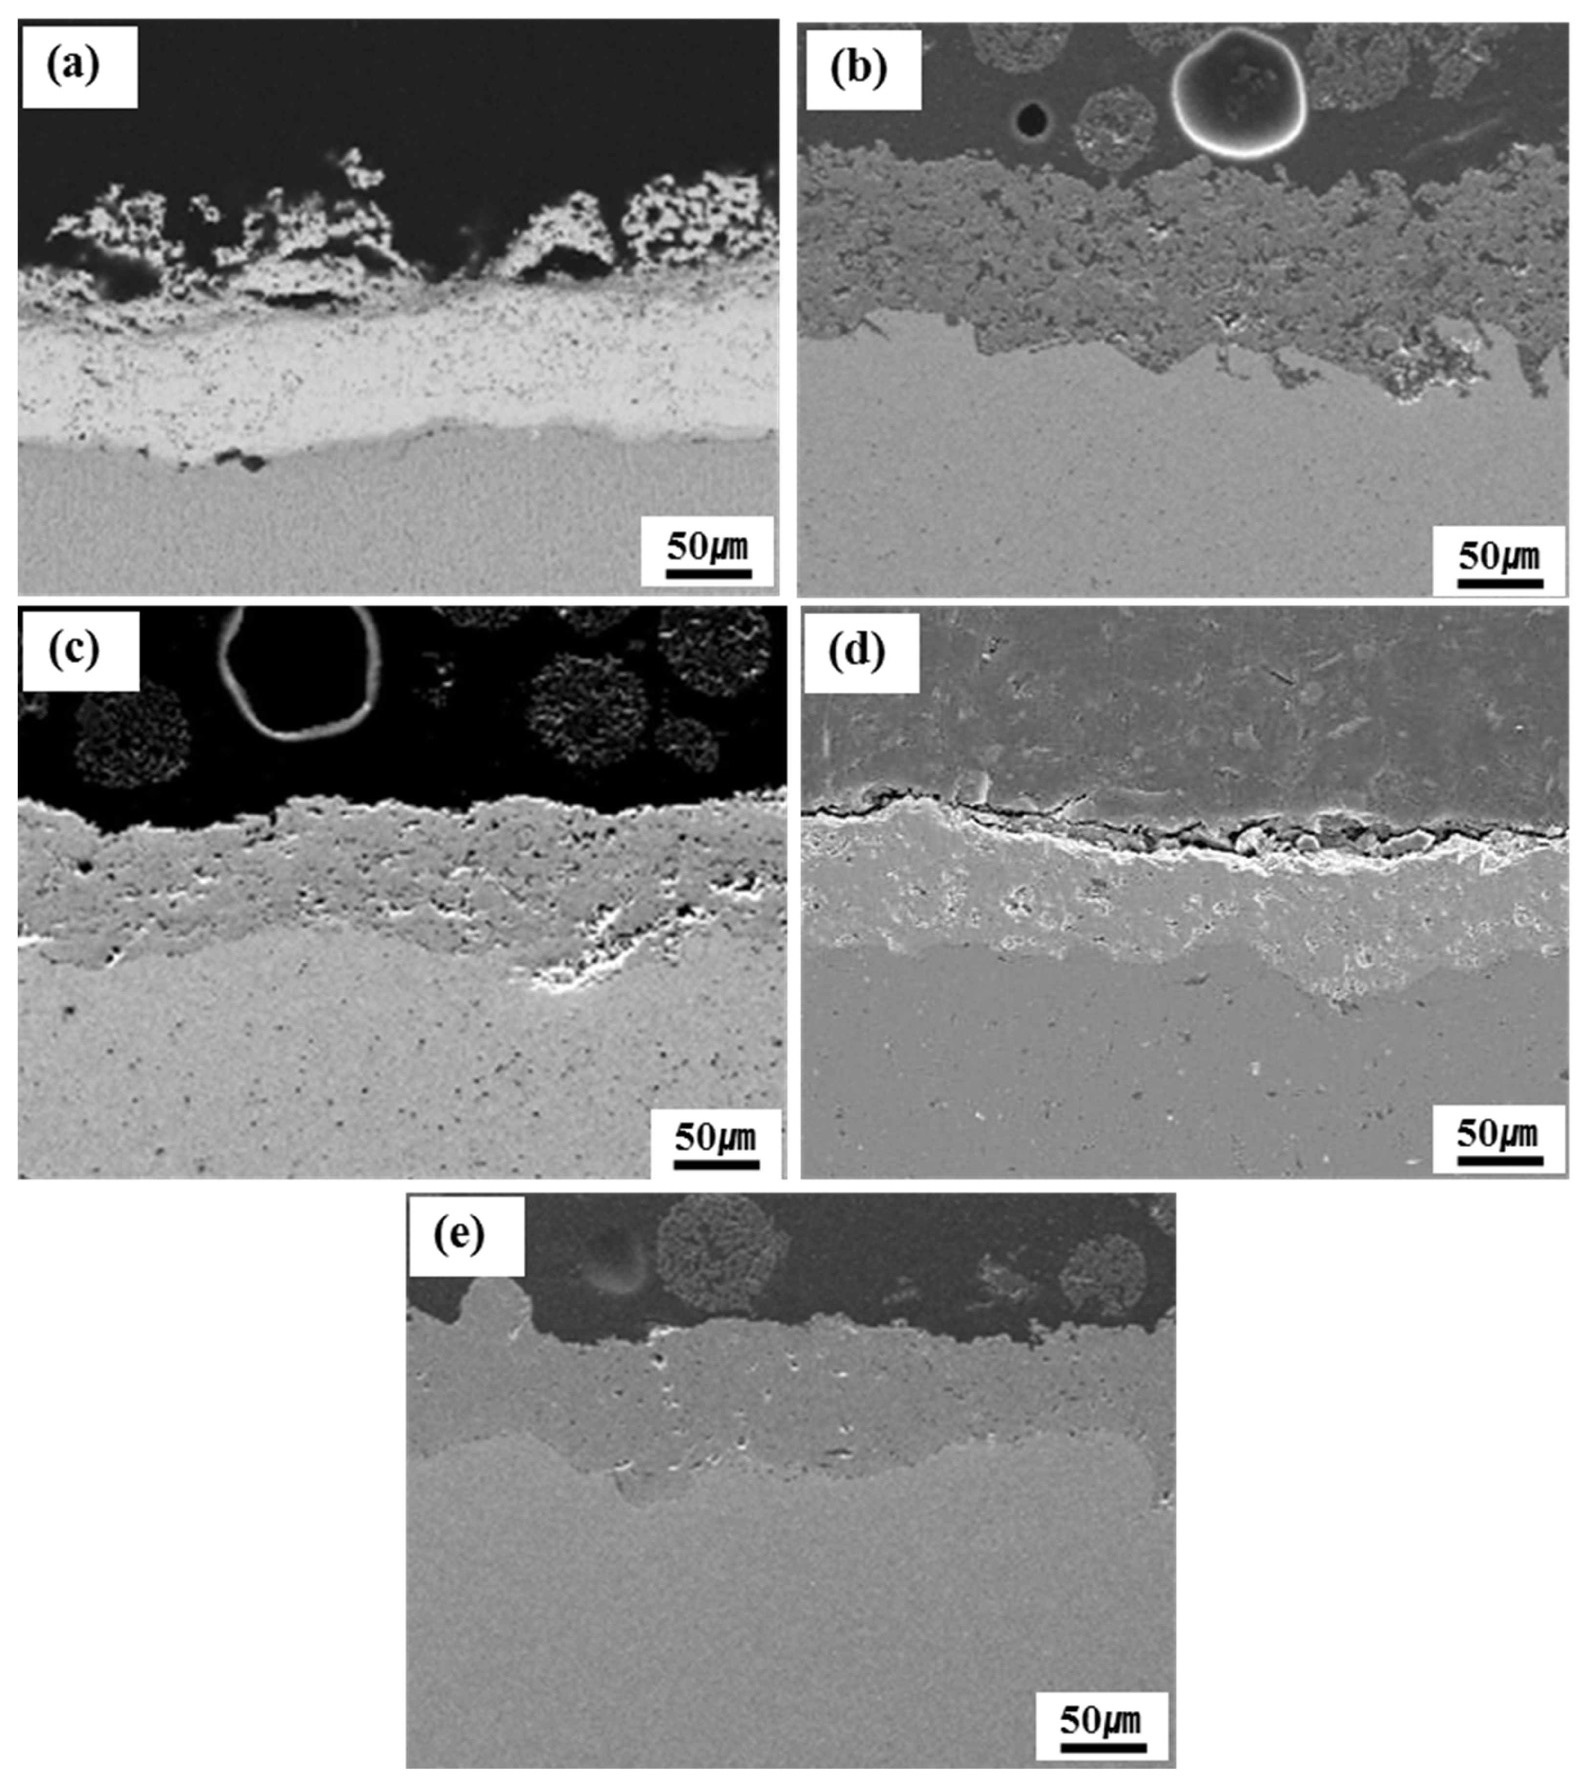 Cross-sectional SEM Micrographs showing the Coating Layer Plasma-sprayed on the Niobium Substrate: (a) TaC, (b) TiC, (c) ZrC, (d) ZrO2, and (e) Y2O3